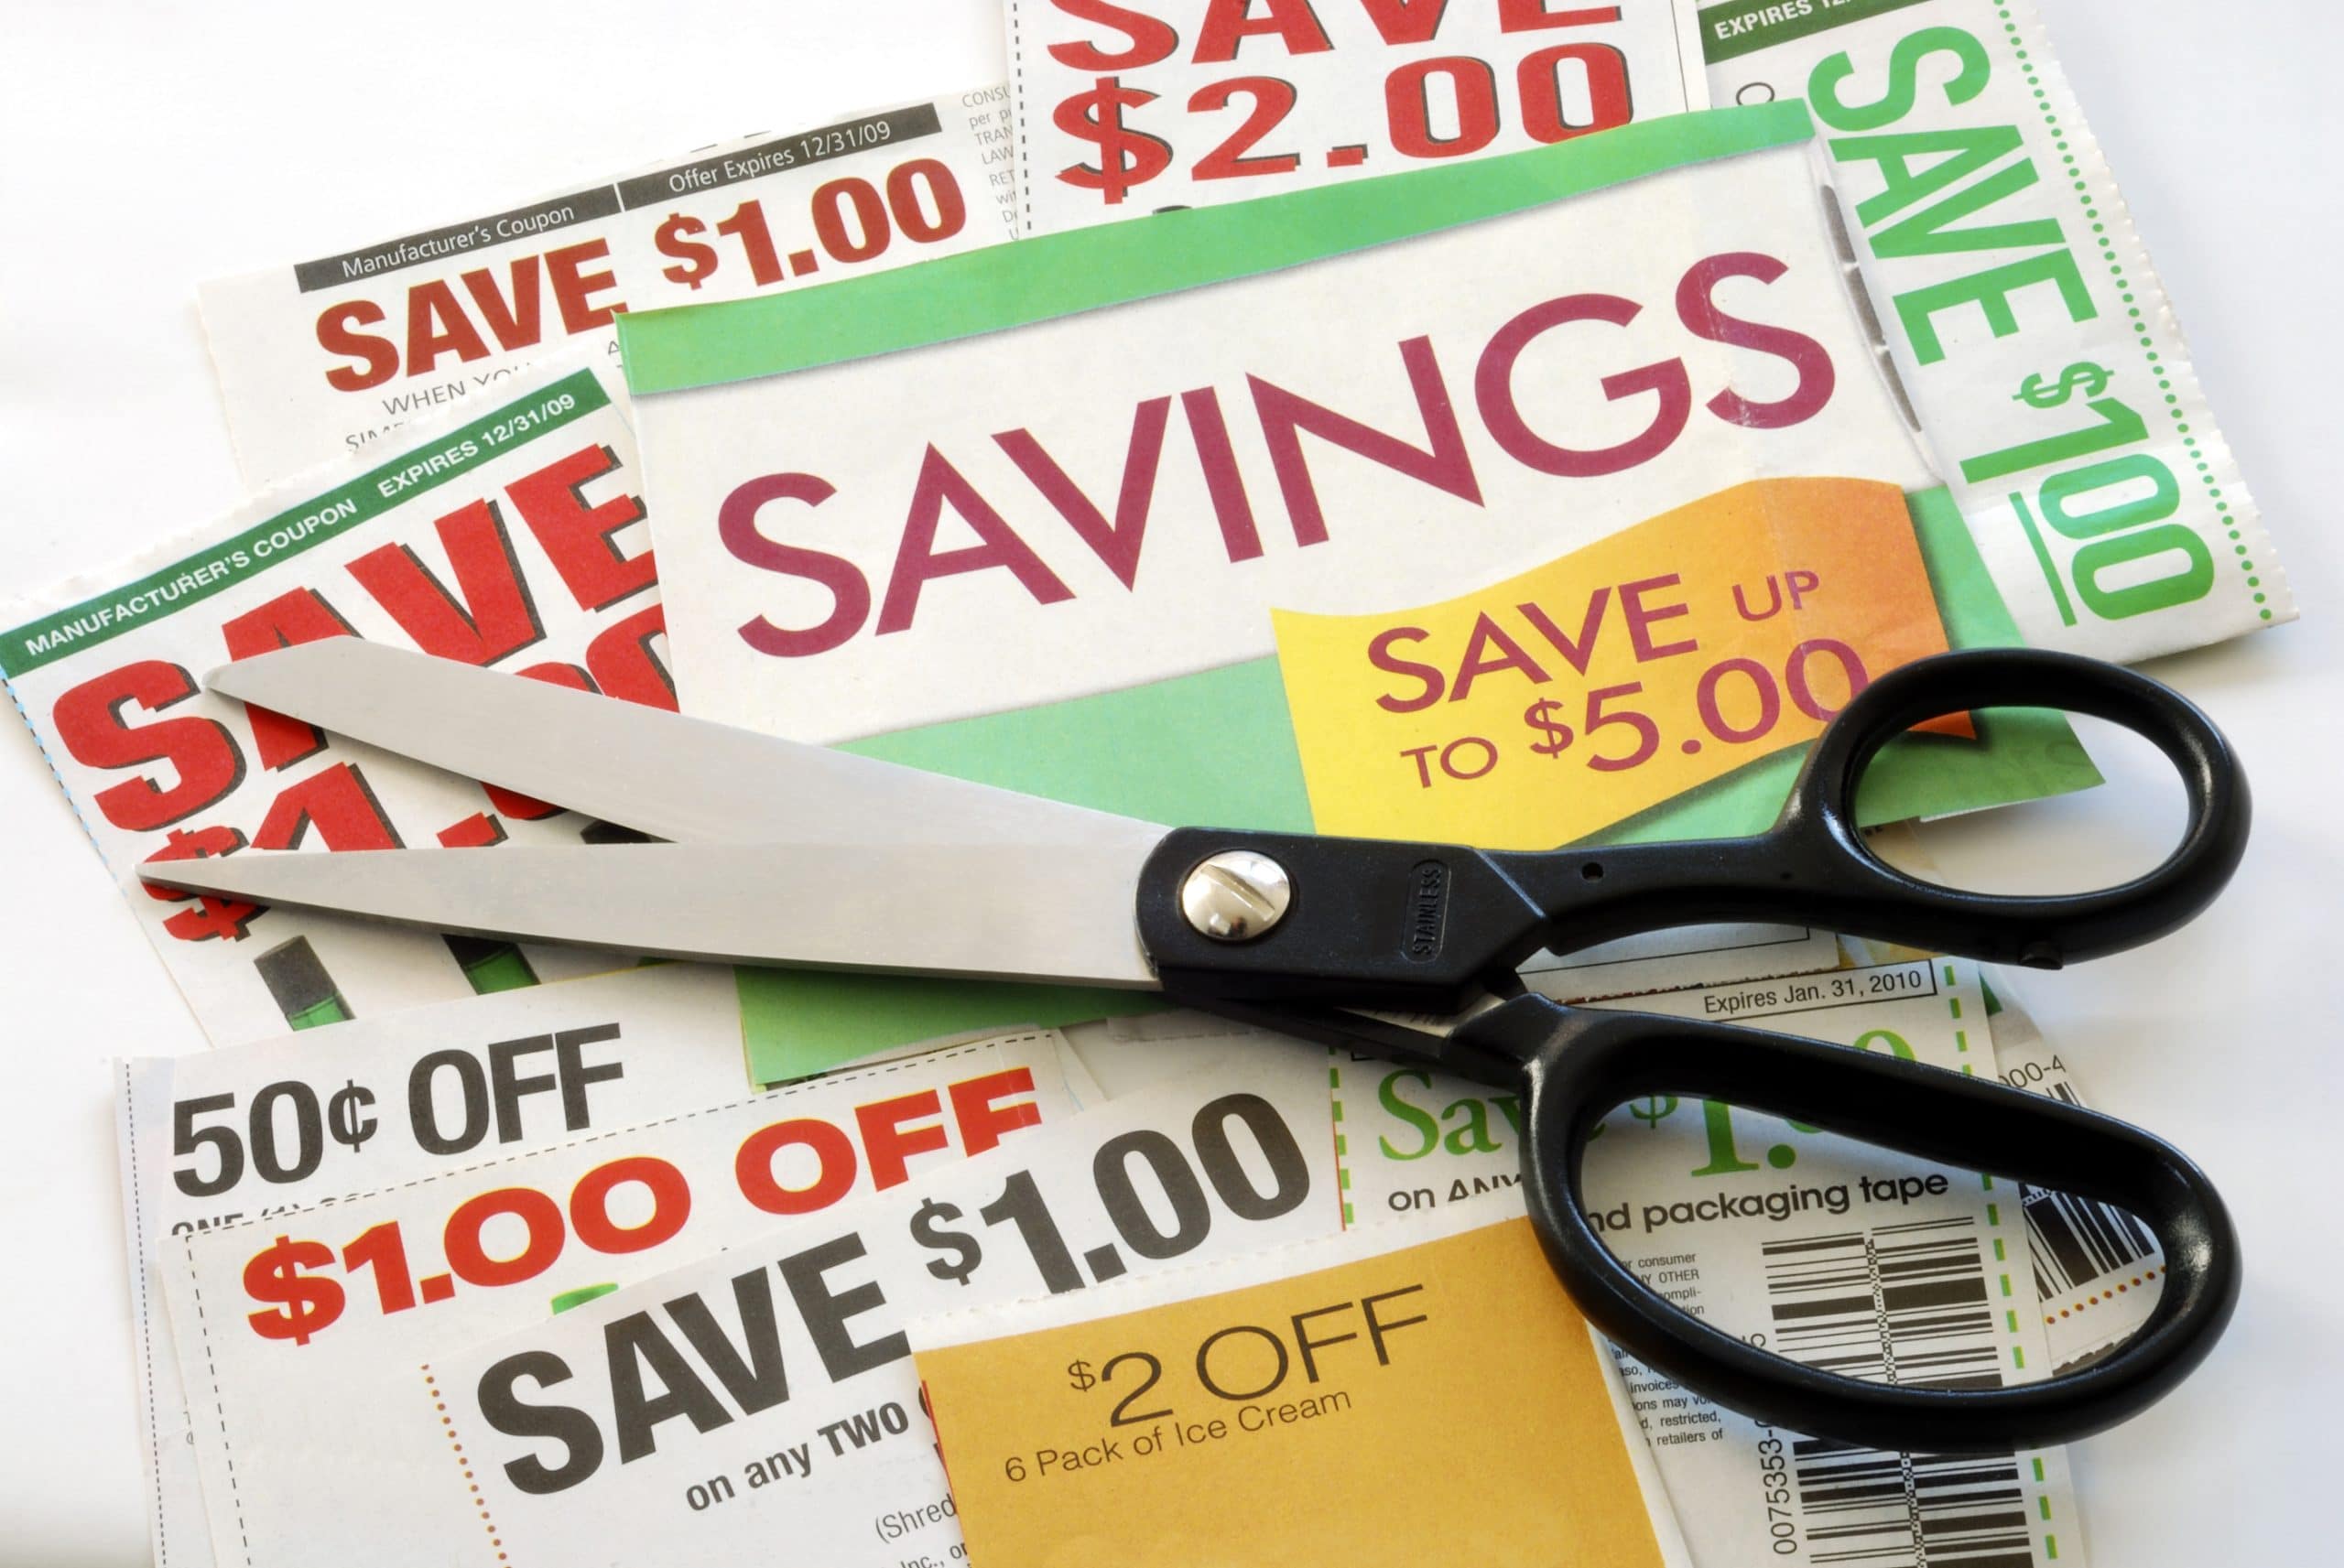 Dollar store coupon apps: Is it possible to save even more?